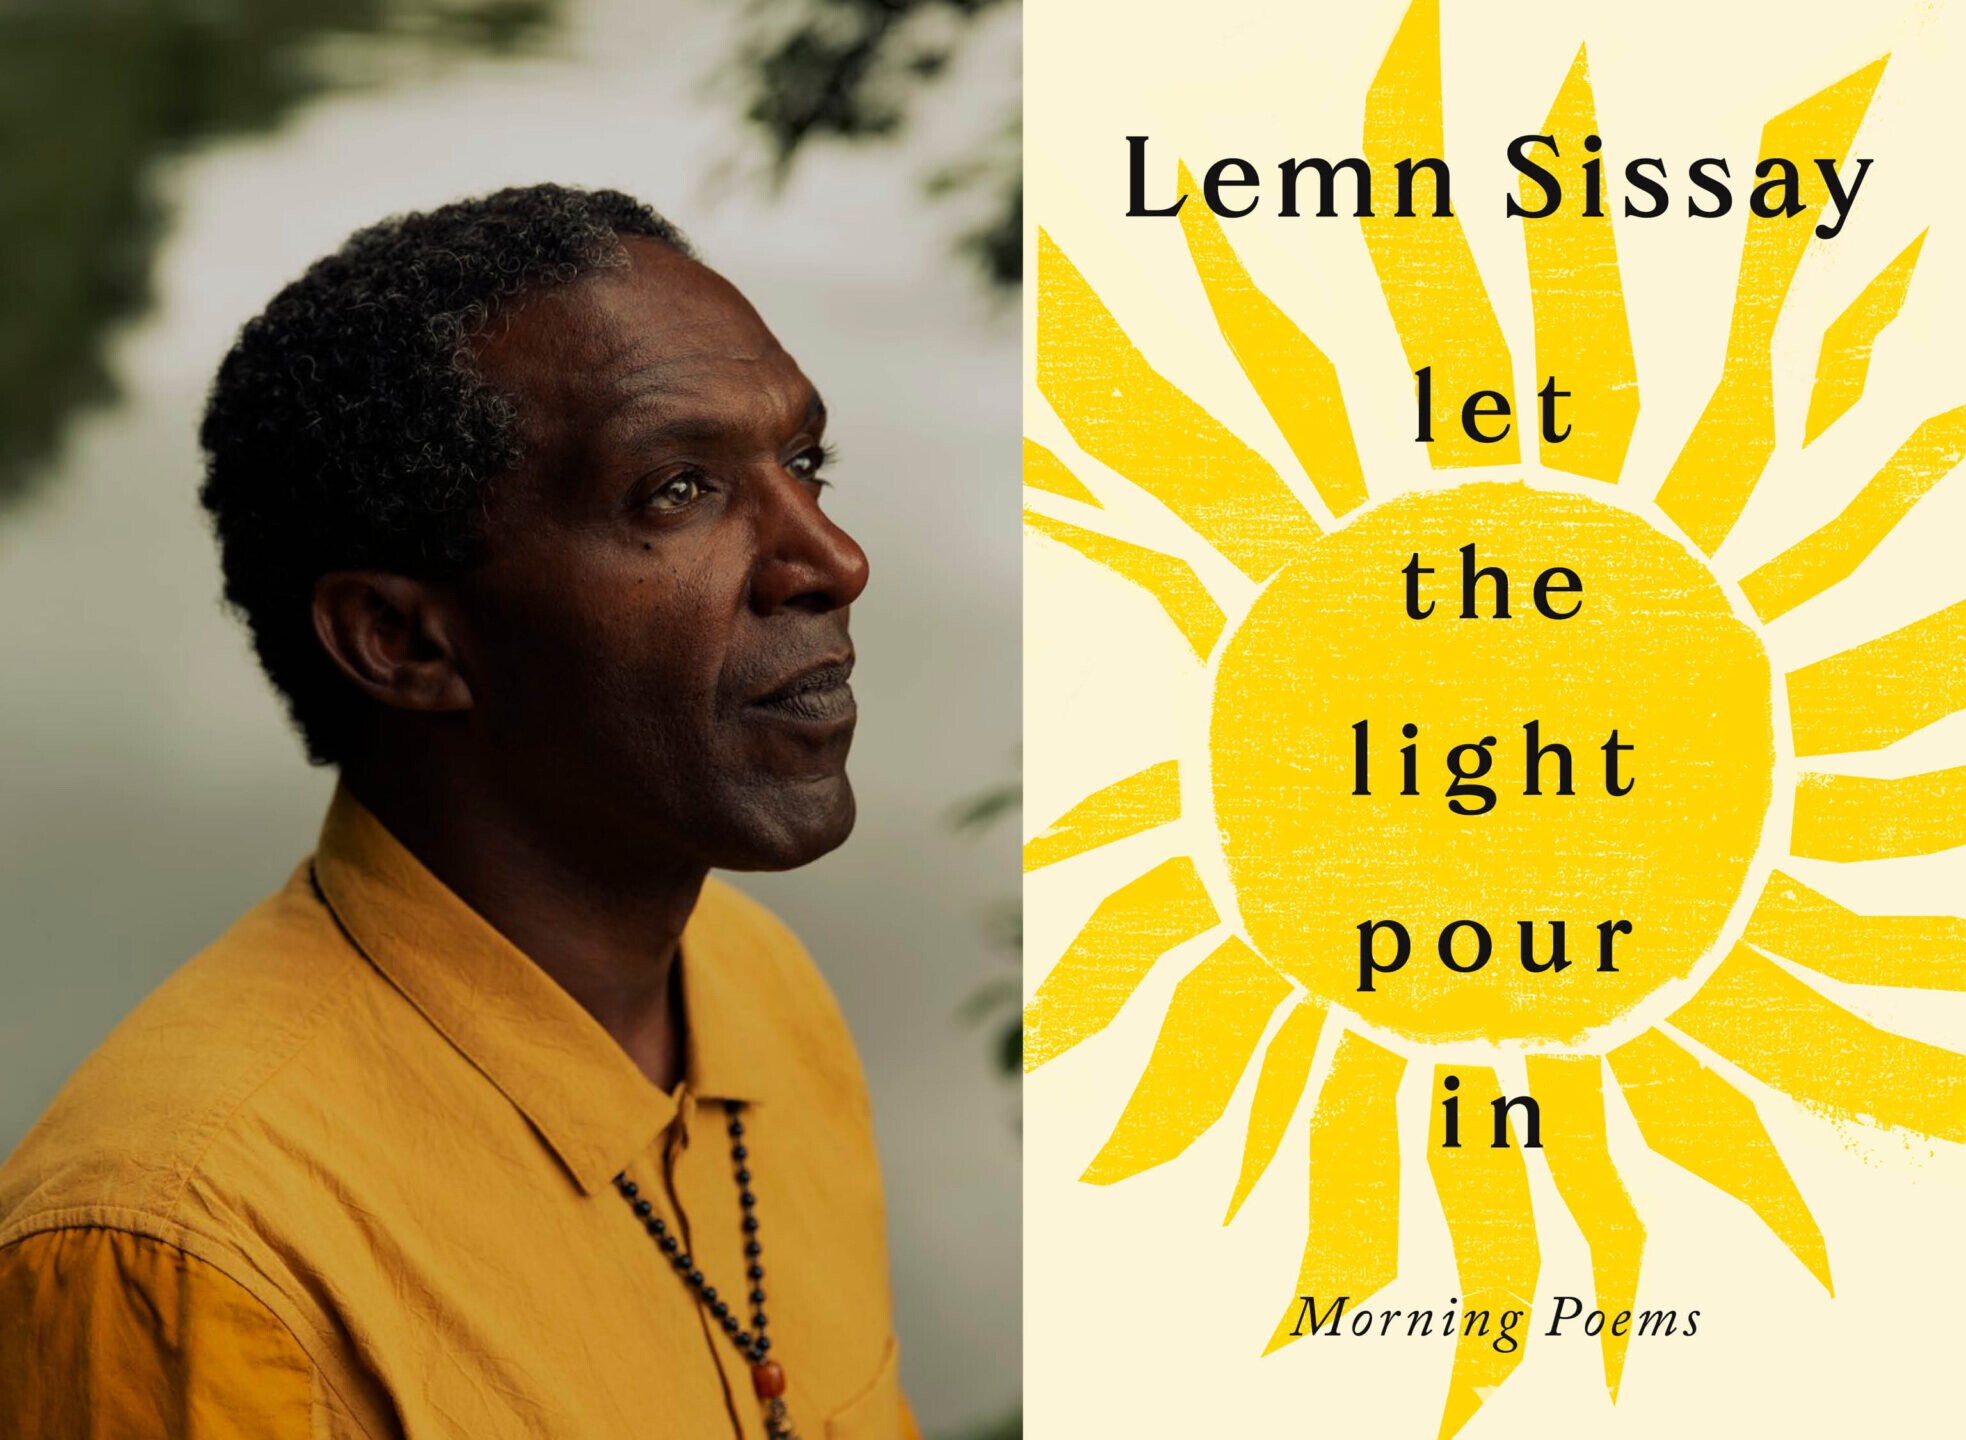 Image name Lemn Sissay Let the light pour in 1 the 10 image from the post Events in Yorkshire.com.